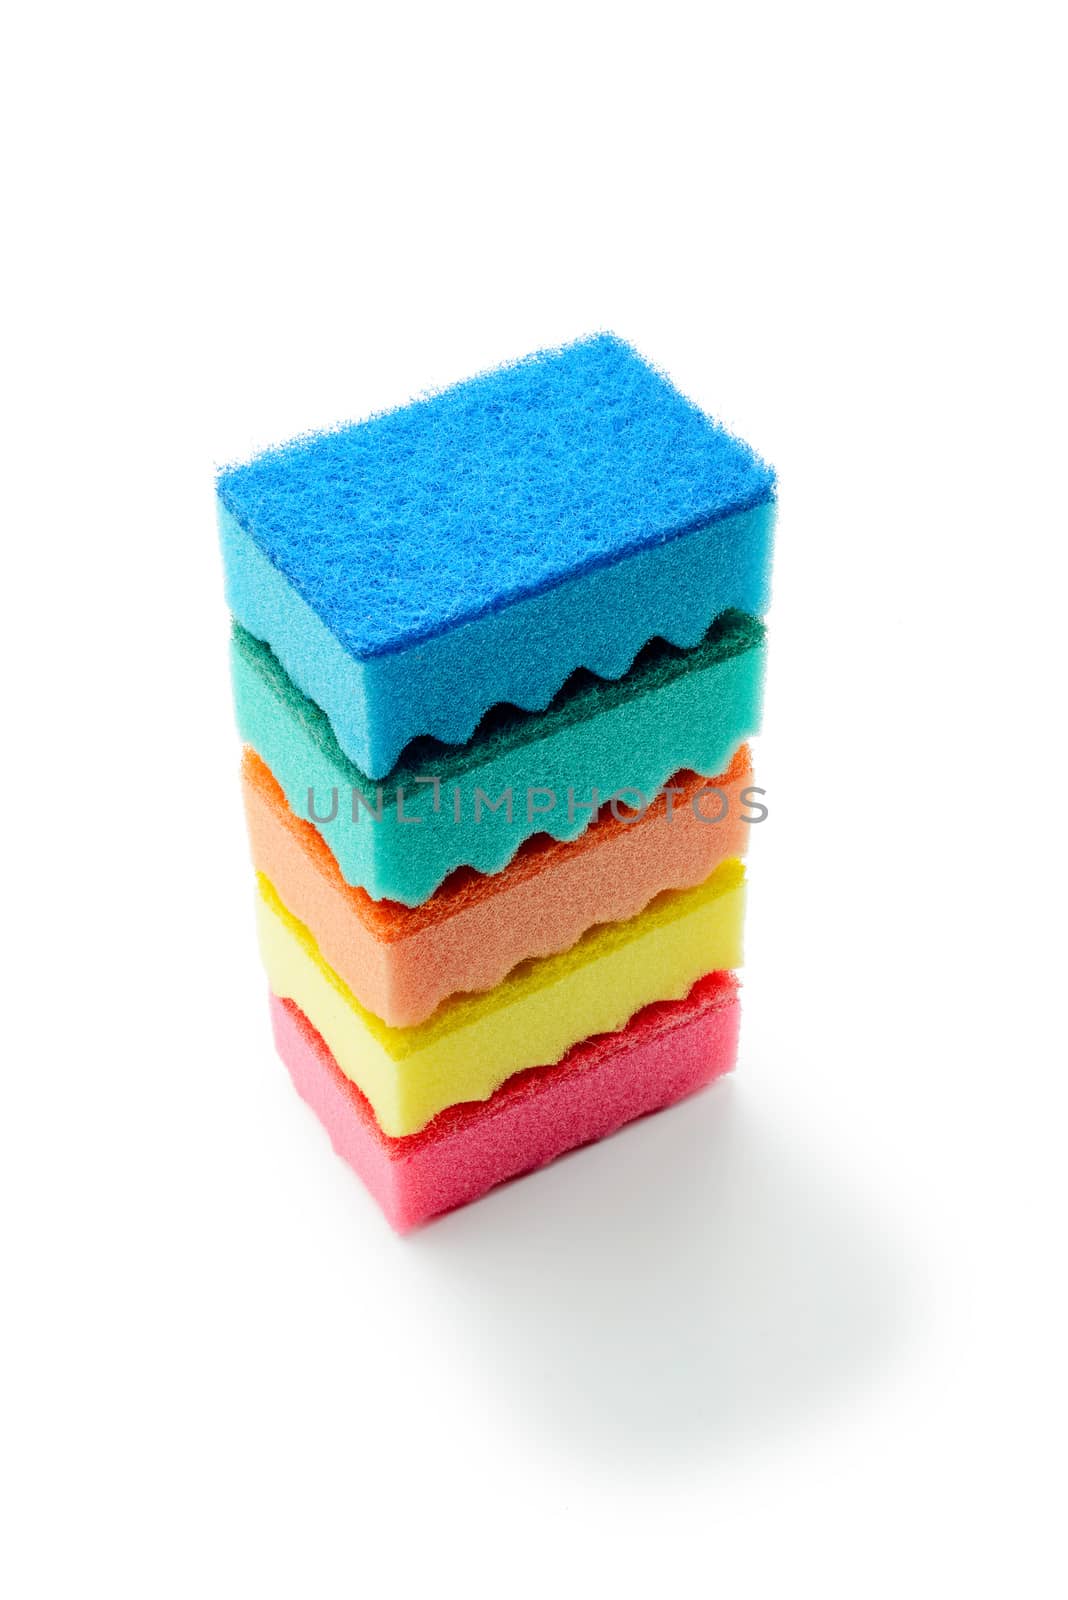 A stack of multicolored kitchen sponges isolated on white background